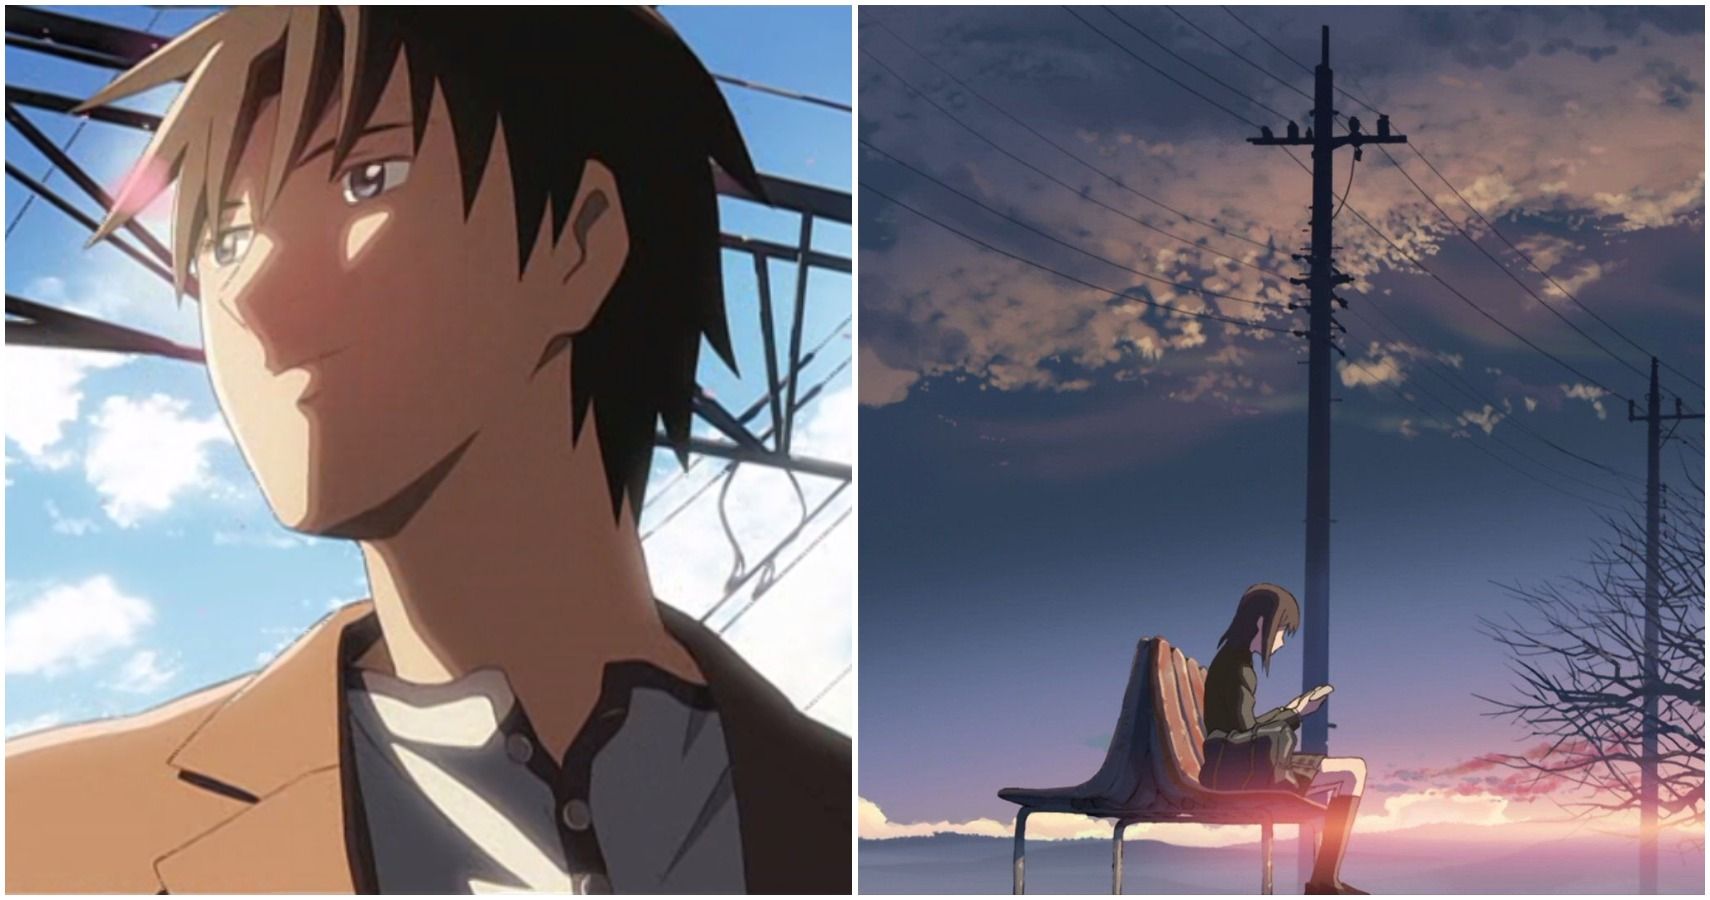 8 anime to watch if you are a fan of 5 Centimeters Per Second